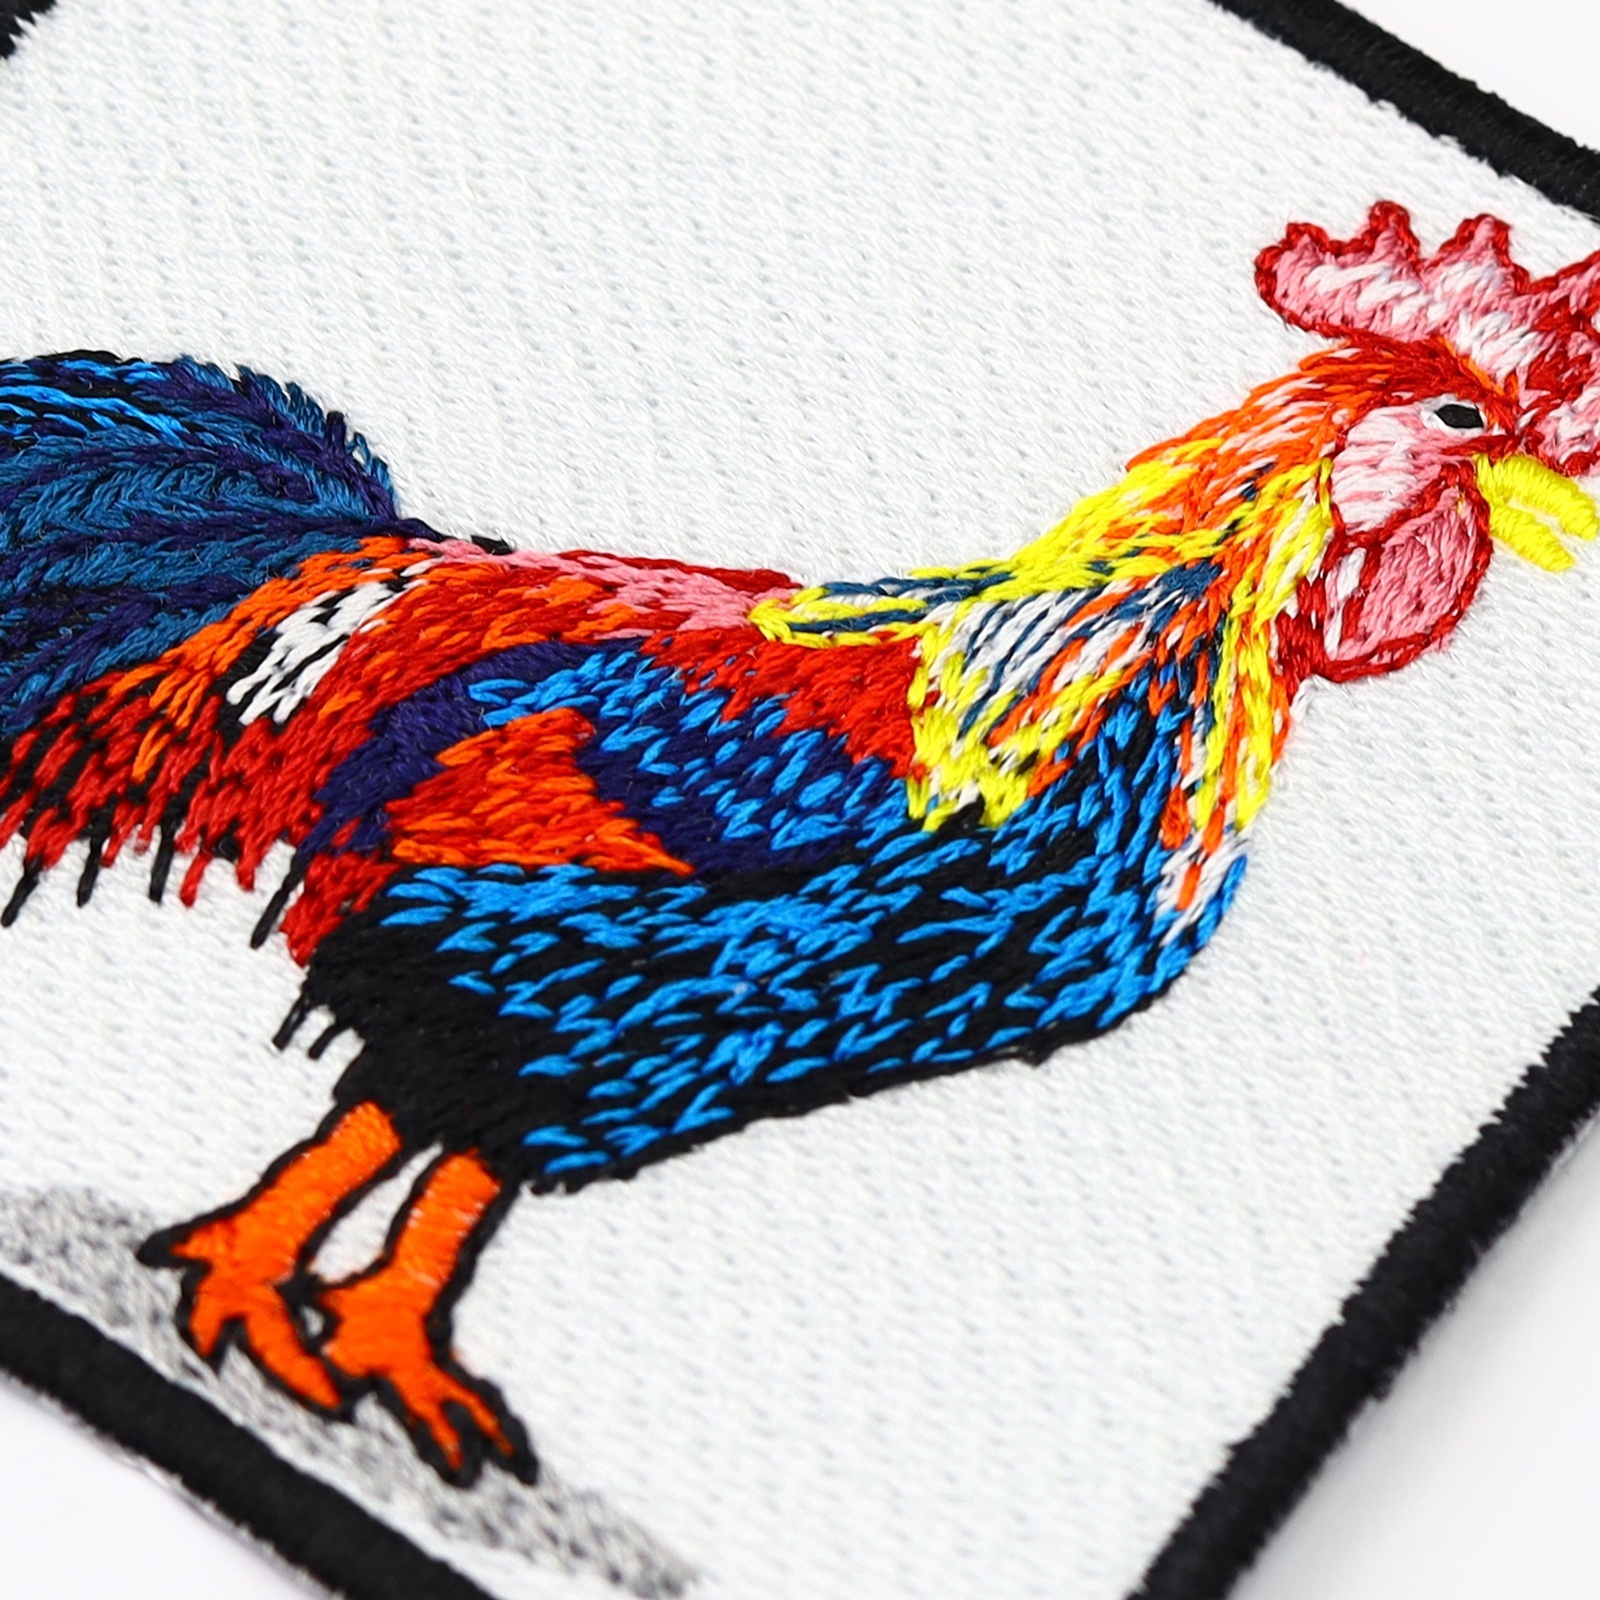 Rooster - Patch